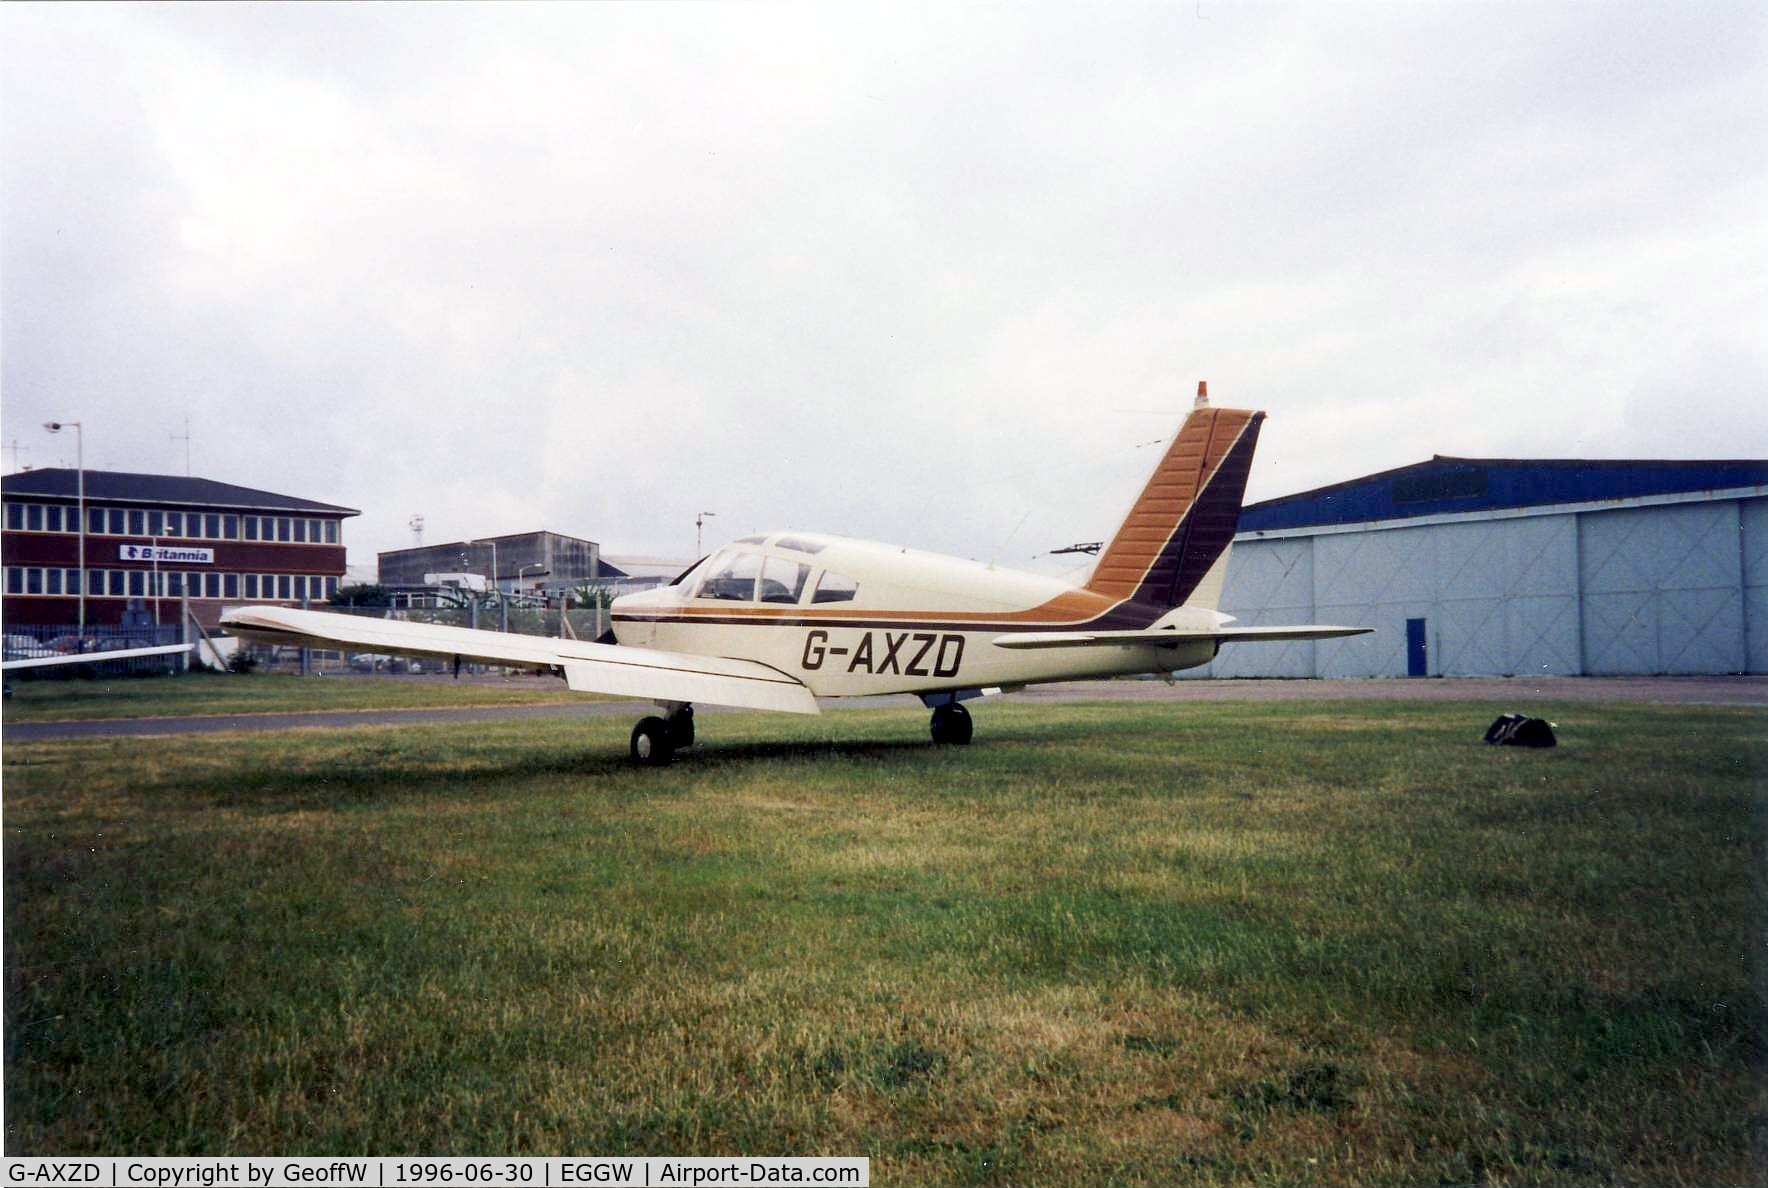 G-AXZD, 1970 Piper PA-28-180 Cherokee C/N 28-5609, Resident at the time